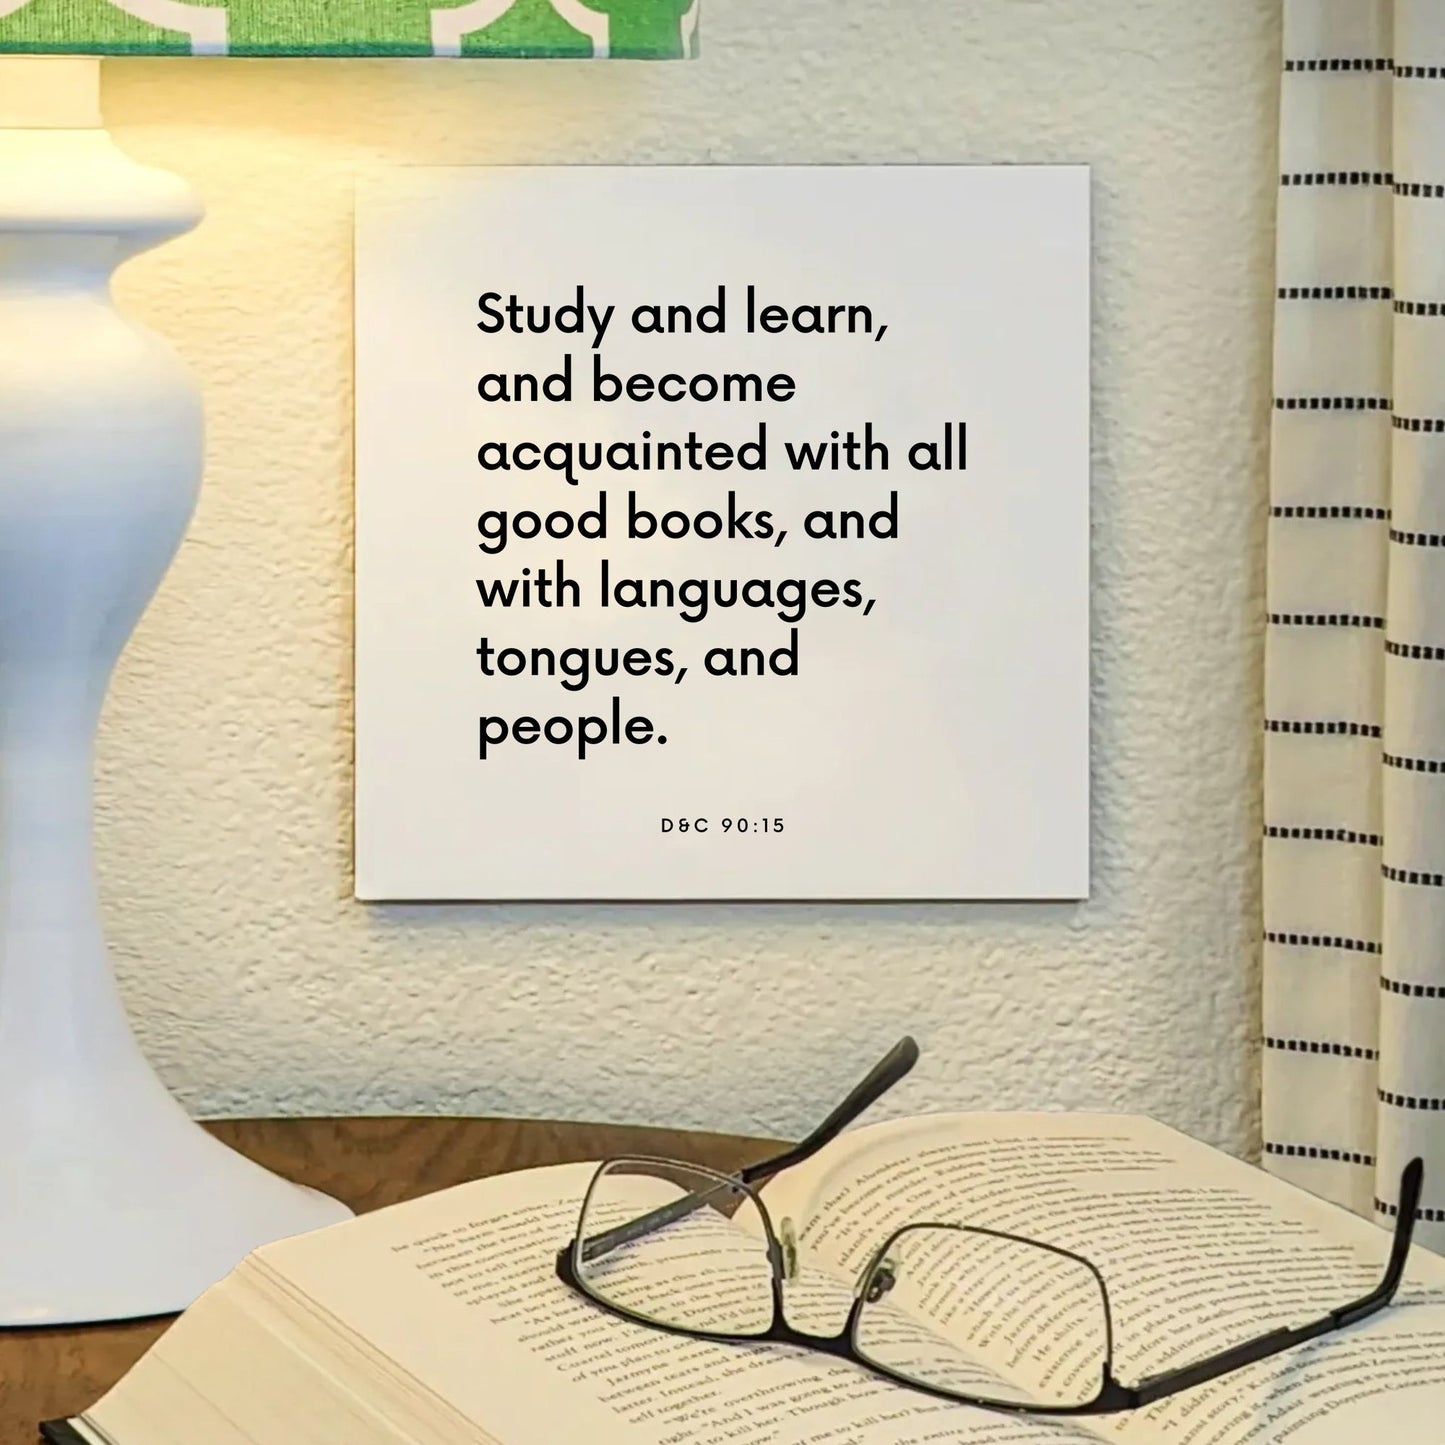 Lamp mouting of the scripture tile for D&C 90:15 - "Study and learn, and become acquainted with all good books"